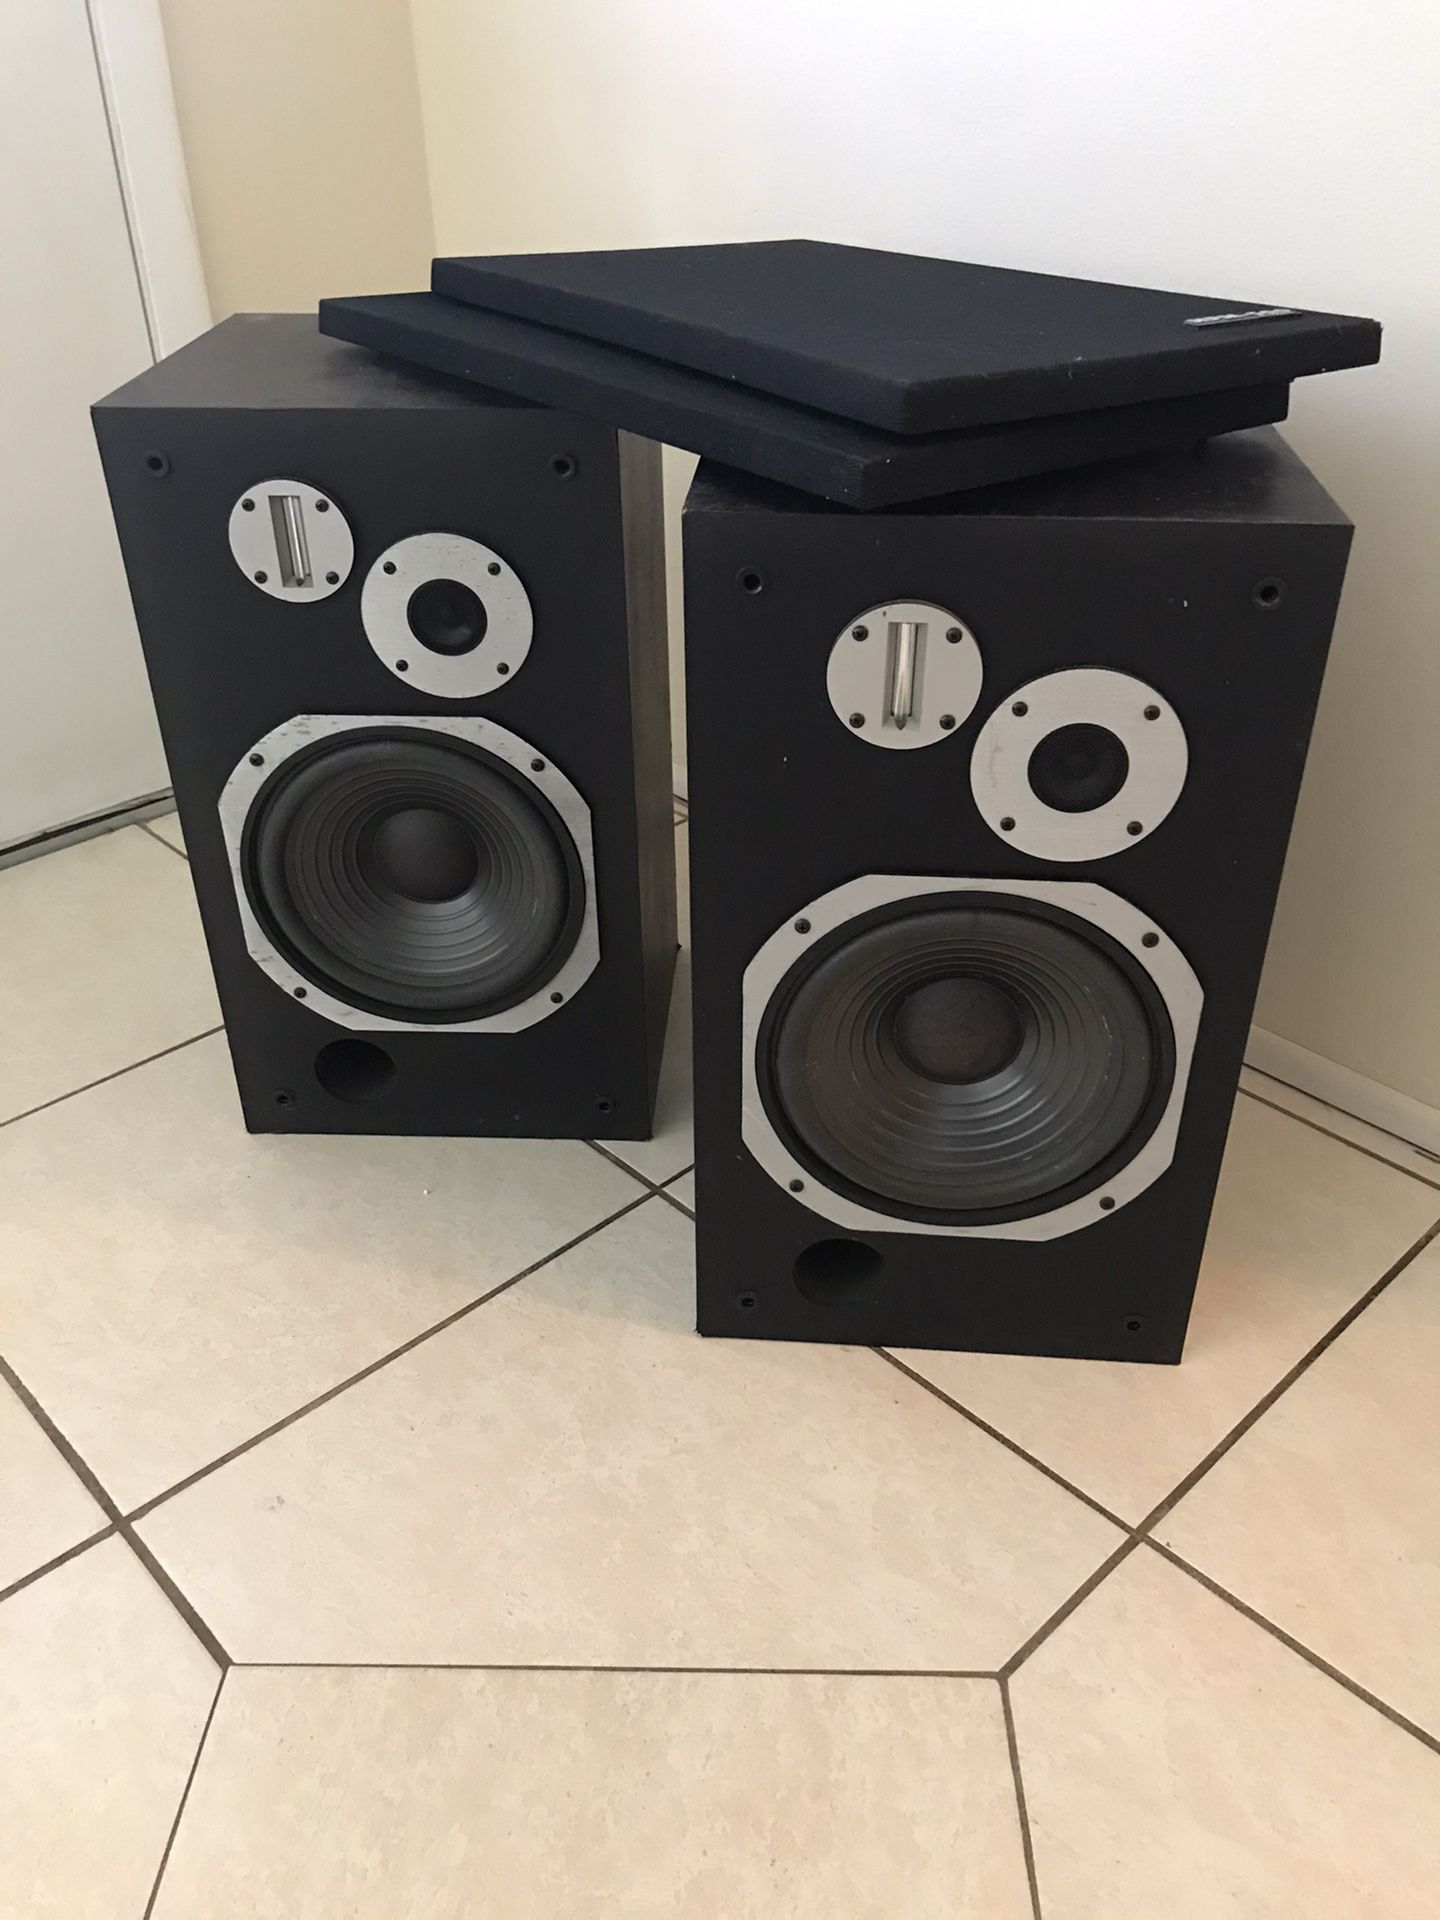 Pioneer HPM-500 vintage loudspeaker system. The speakers will rock the standard garage man cave or living room of your house lots of bass they are us